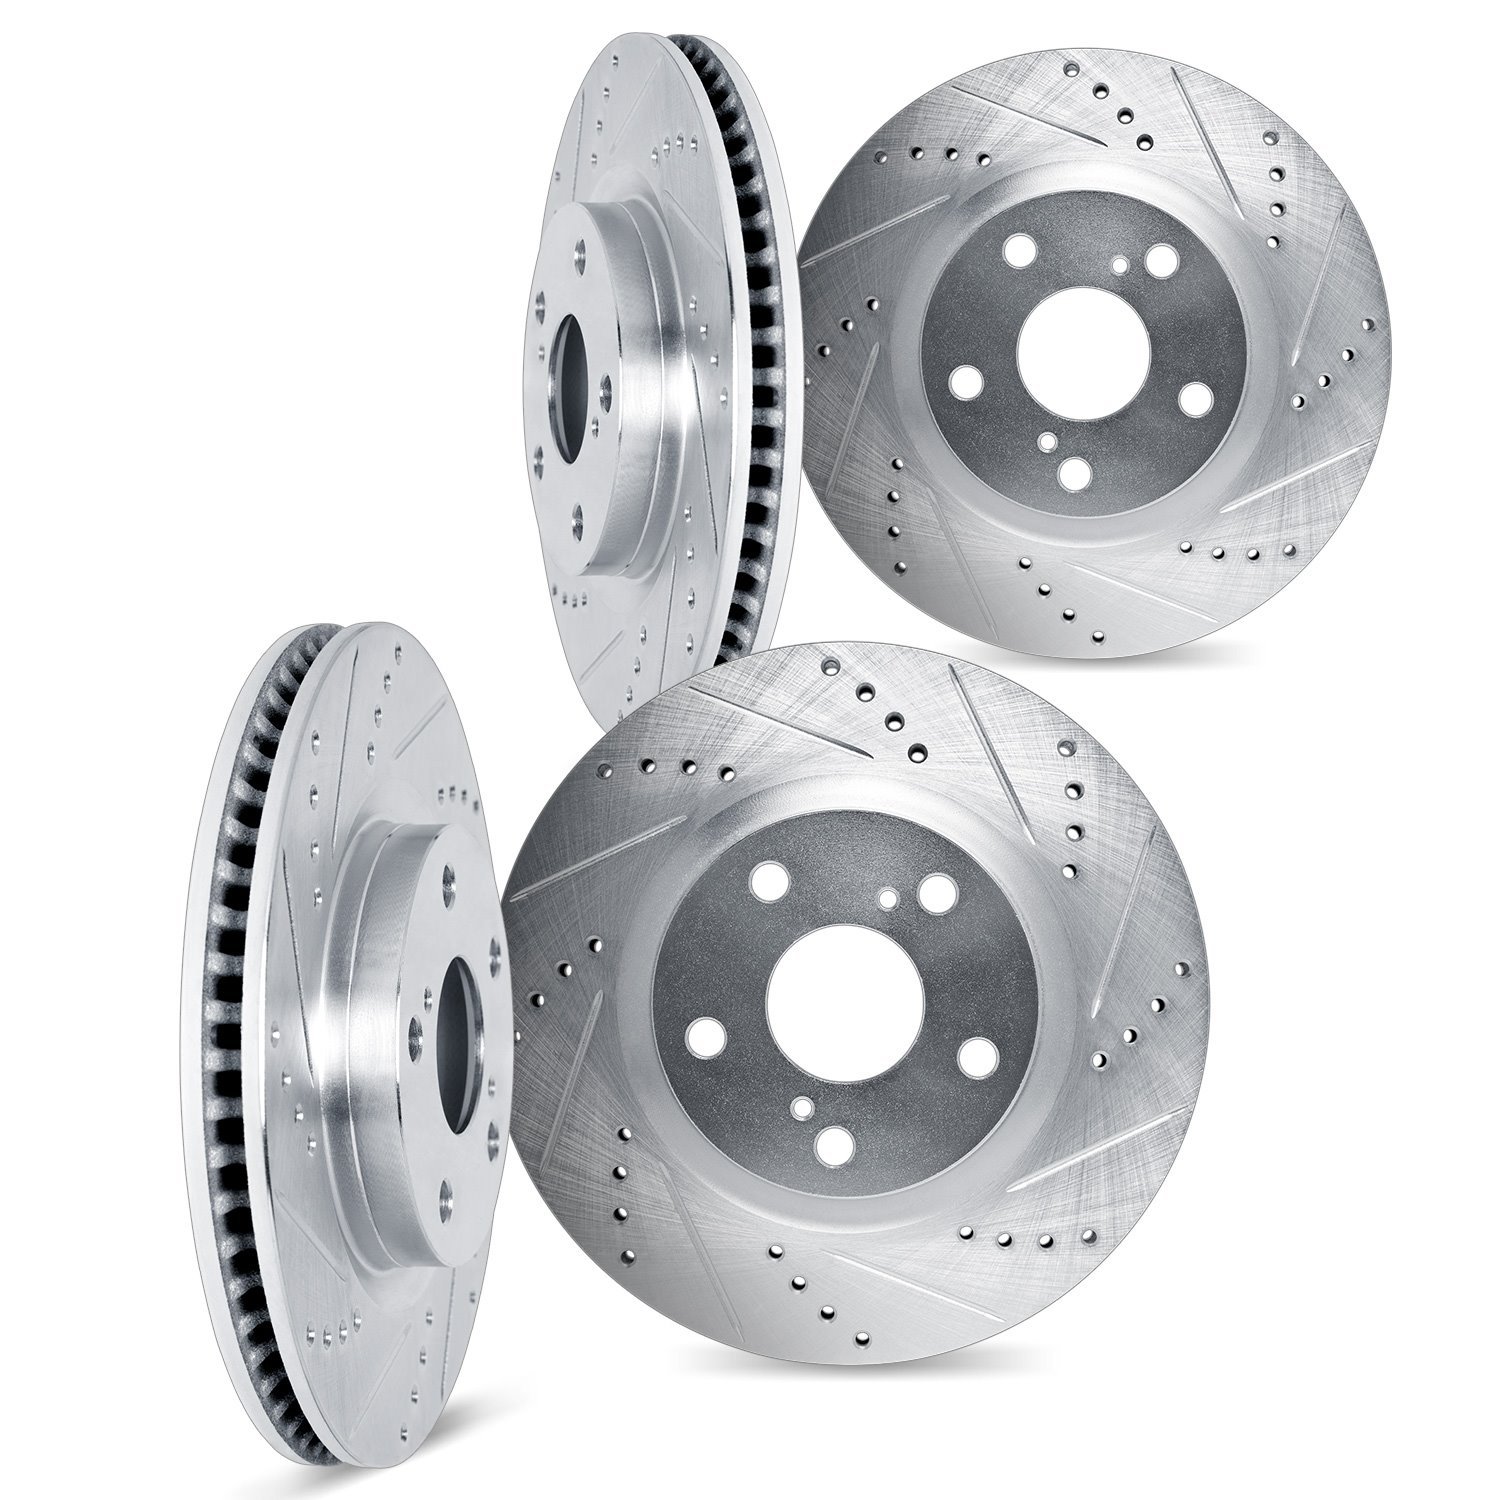 7004-67003 Drilled/Slotted Brake Rotors [Silver], 2005-2014 Infiniti/Nissan, Position: Front and Rear